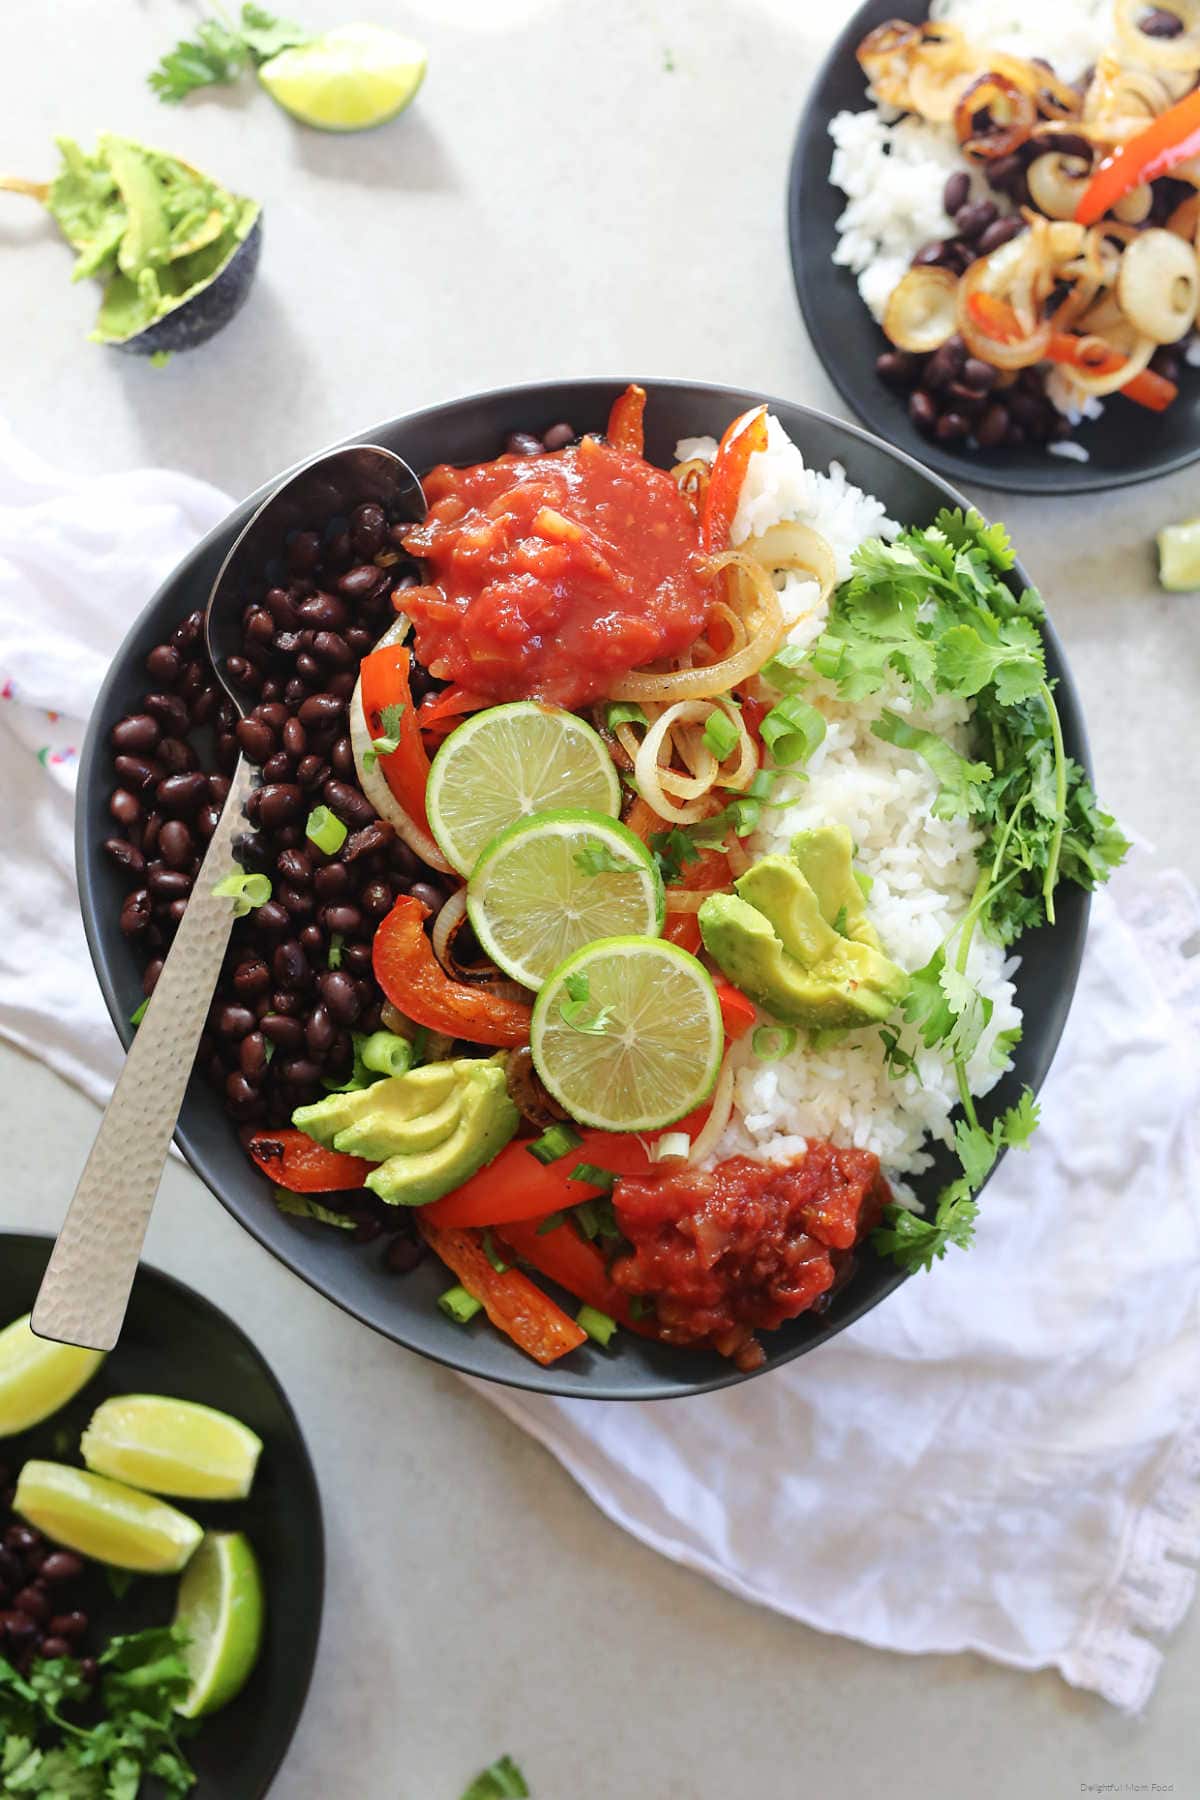 Vegetarian burrito bowl ready with zesty Mexican flavors in less than 30 minutes! It is the ultimate gluten-free healthy fajita burrito bowl layered with sautéed peppers and onions over warm rice and beans! #healthy #fajita #burrito #bowl #easy #quick #glutenfree #vegan #vegetarian #rice #beans #Mexican #recipe #entree #main | Recipe at delightfulmomfood.com